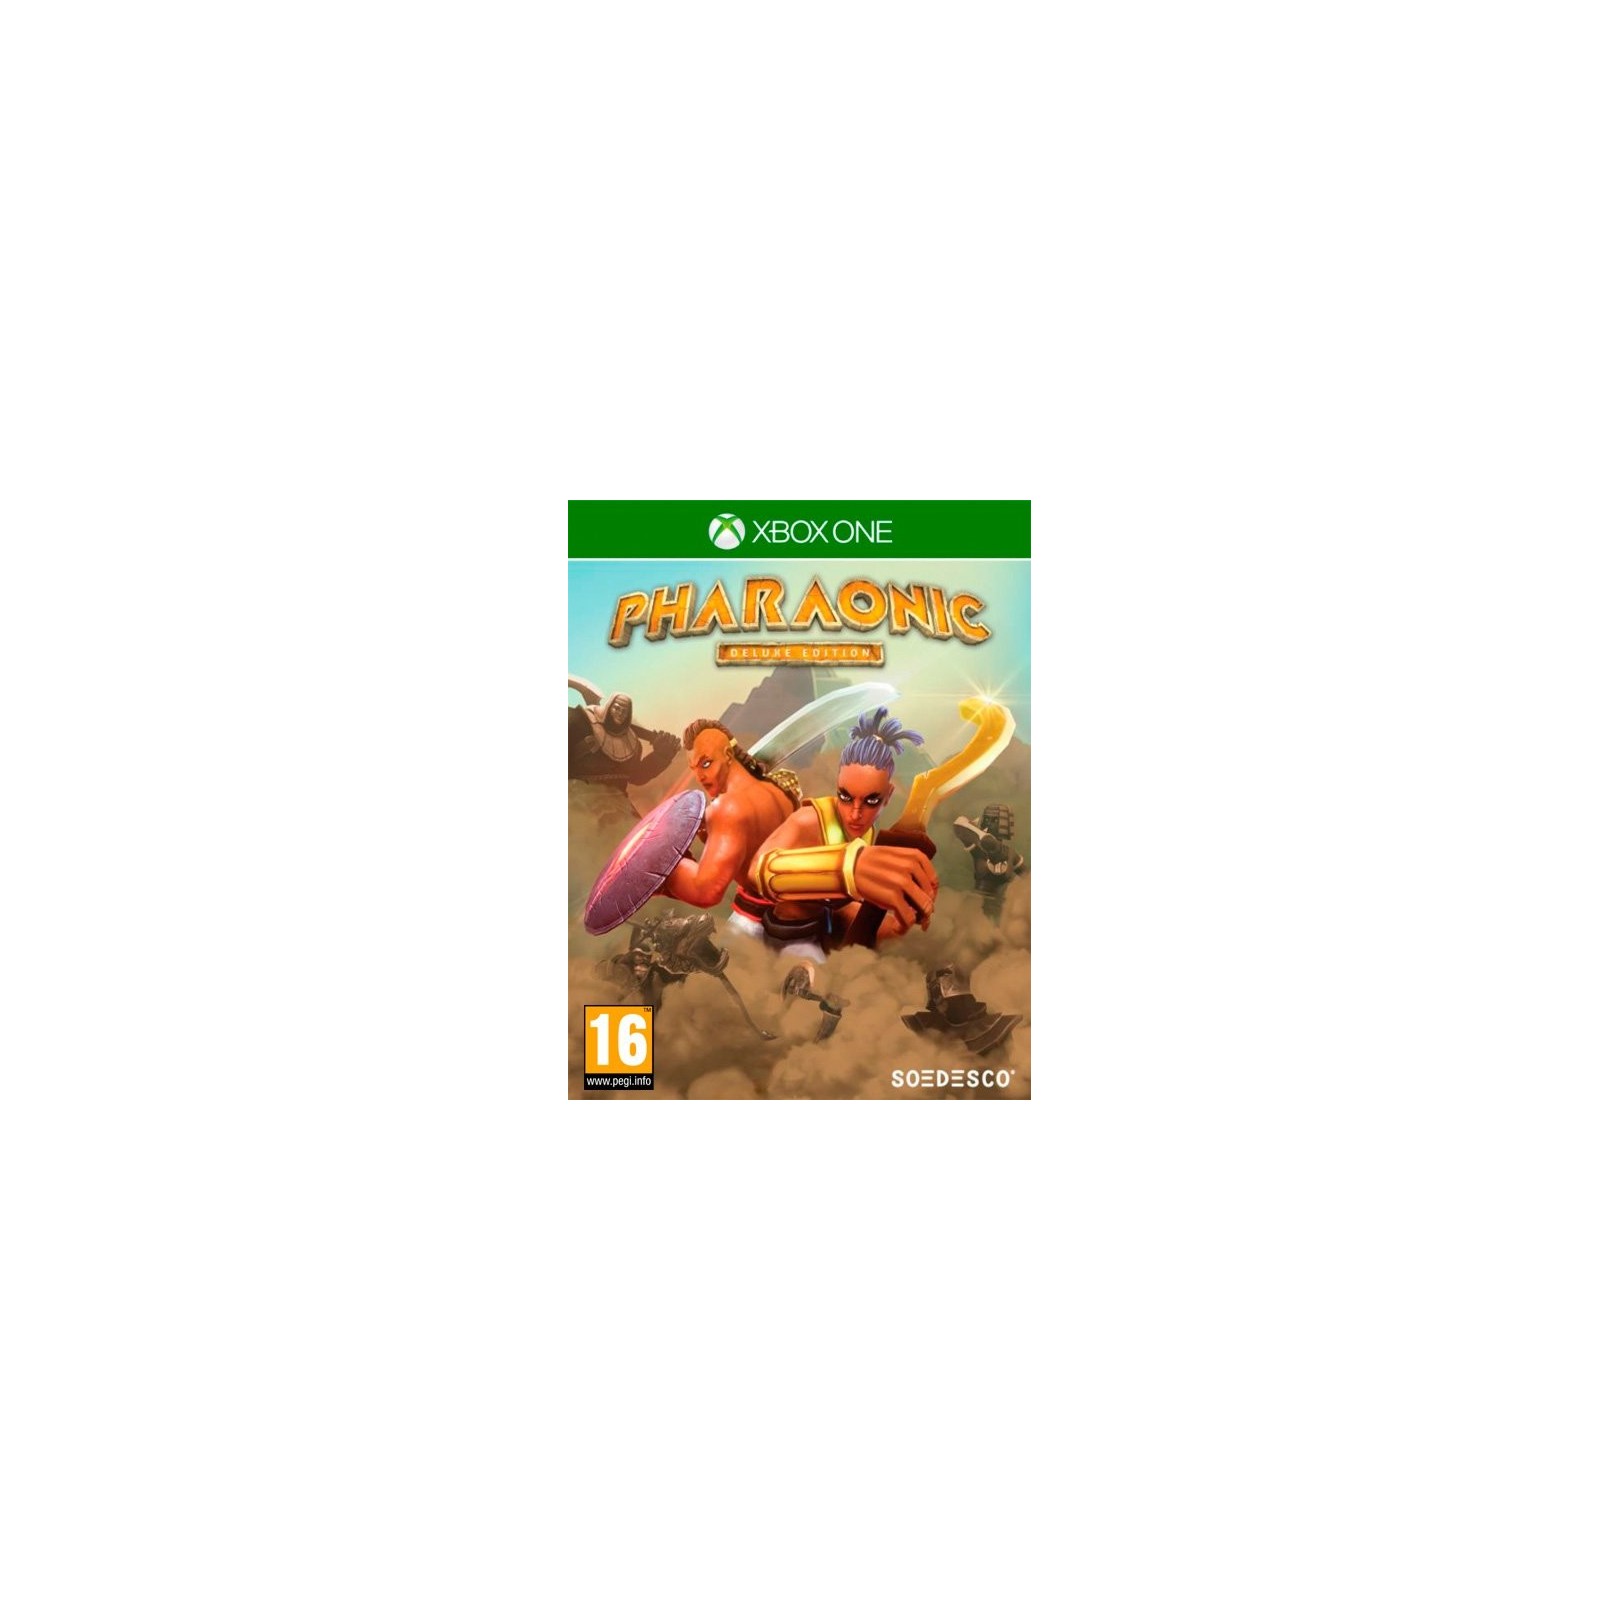 PHARAONIC DELUXE EDITION